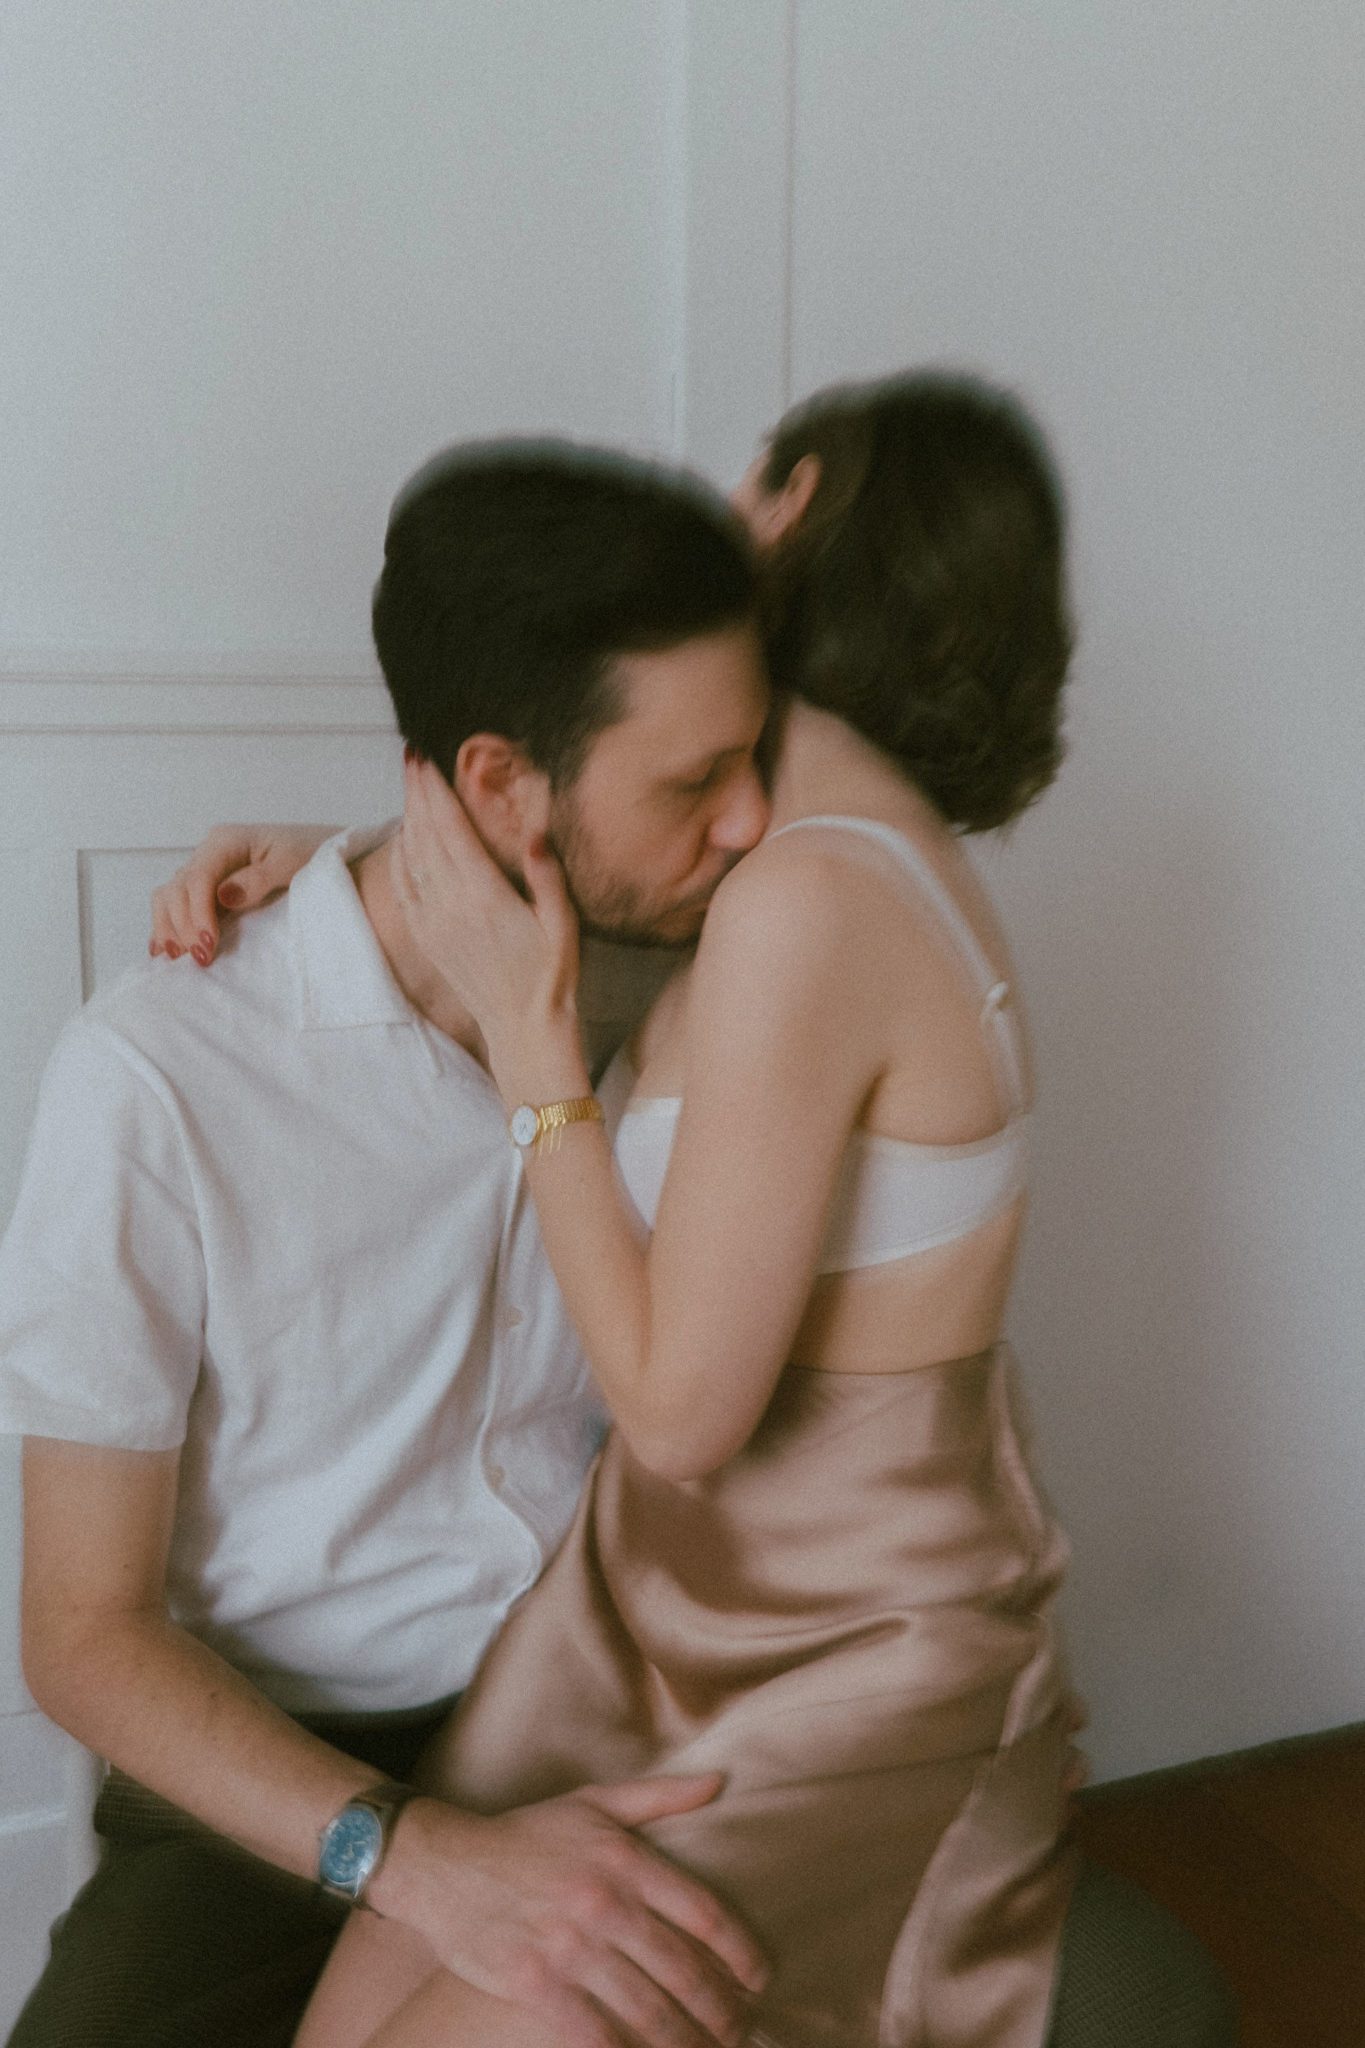 Vintage-inspired engagement session, blurry intimate portraiture, trendy photography style.